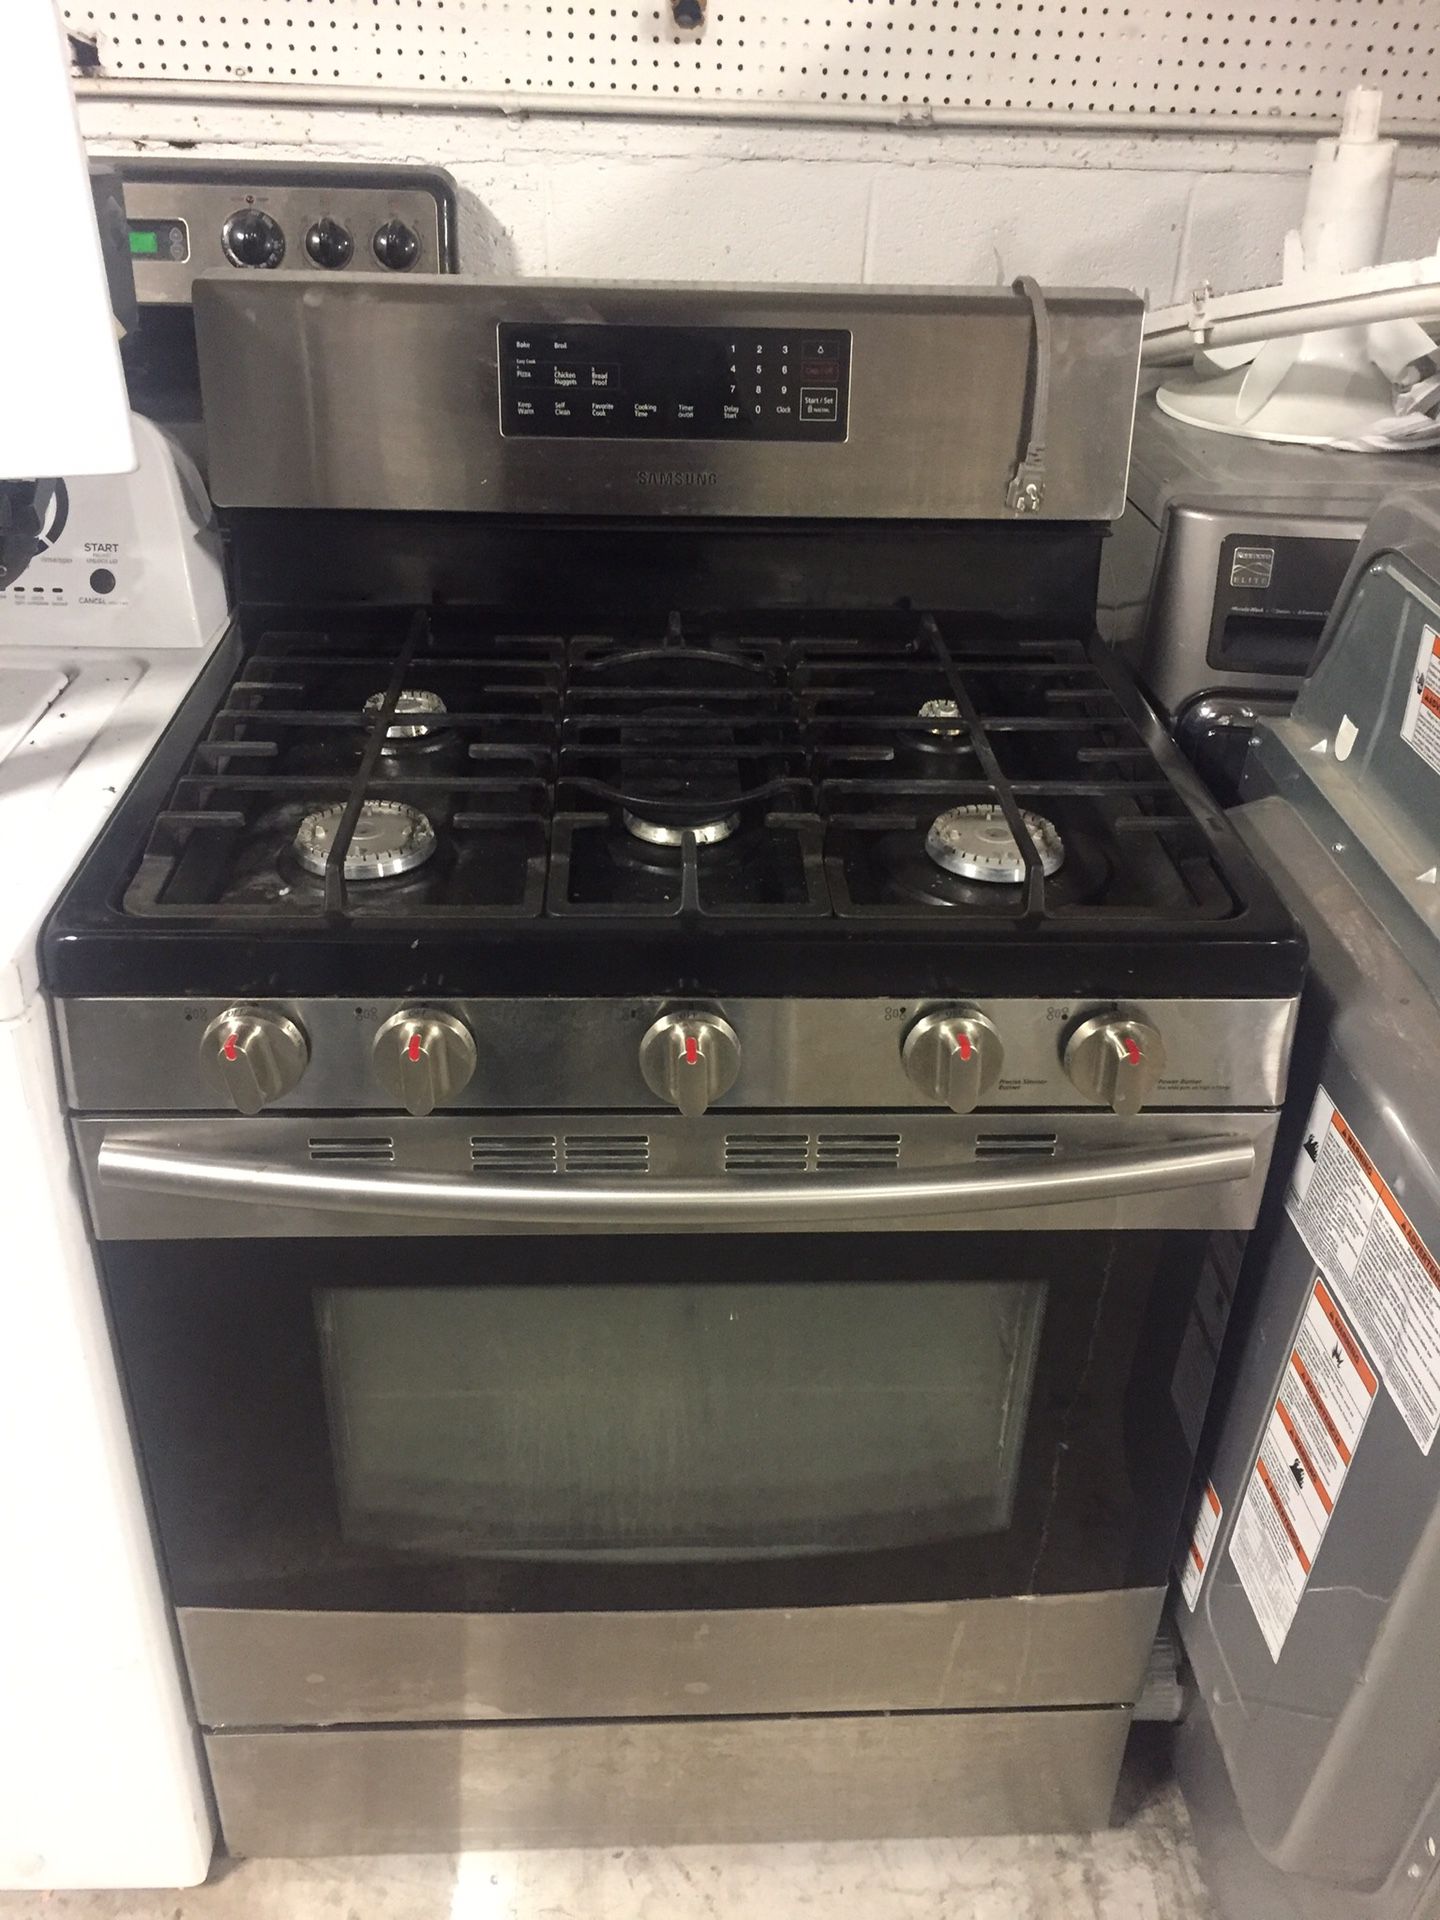 USED 2017 SAMSUNG STAINLESS STEEL GAS STOVE 5 BURNERS COMES WITH 60 DAY WARRANTY SAME DAY DELIVERY AVAILABLE $375